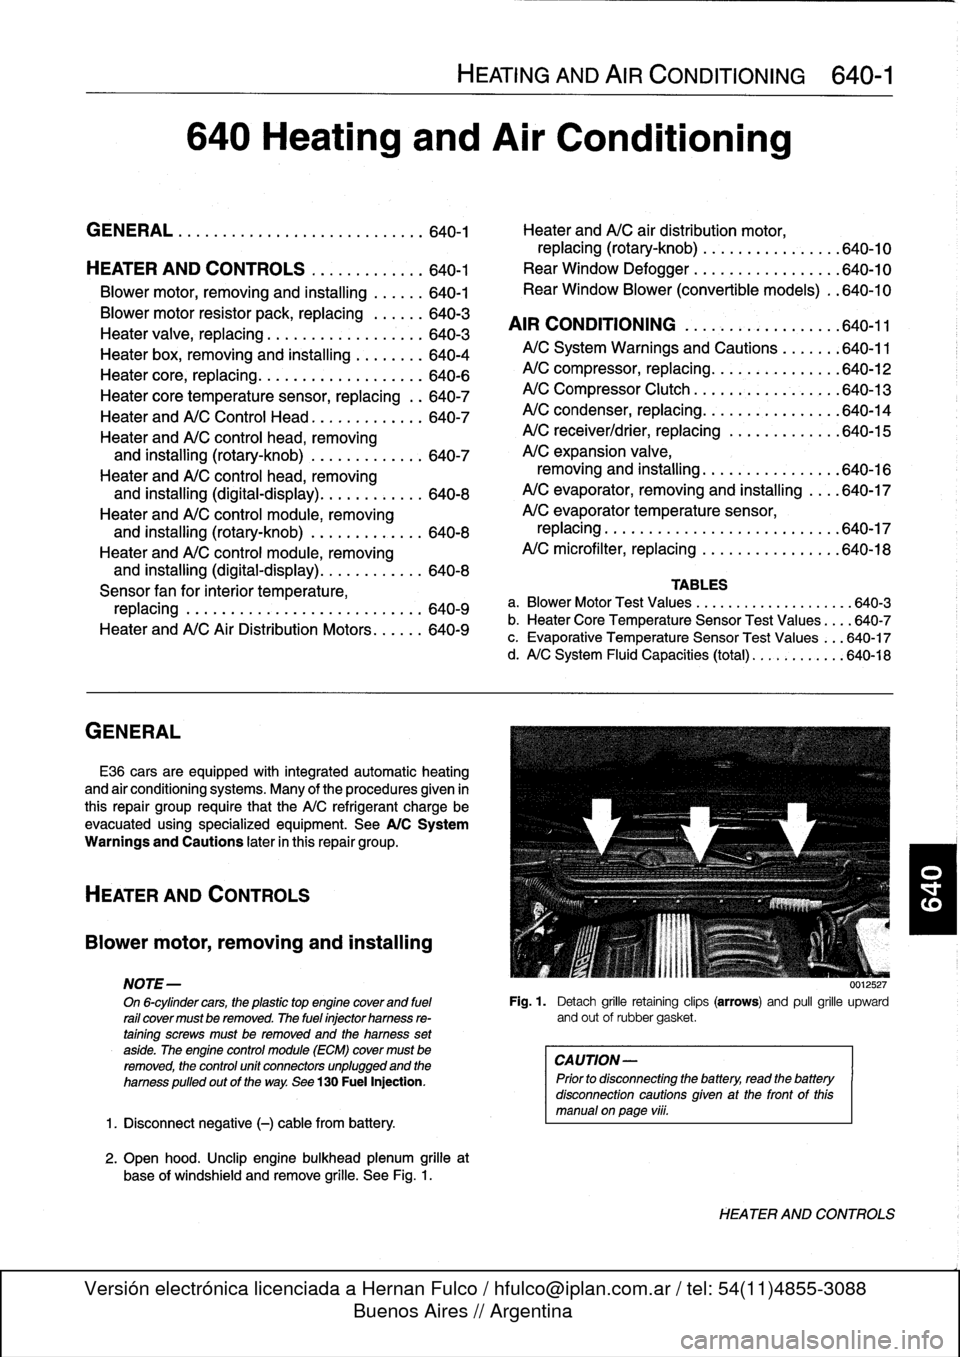 BMW 318i 1997 E36 Service Manual 
GENERAL

E36
cars
are
equipped
with
integrated
automatic
heating

and
air
conditioning
systems
.
Many
of
the
procedures
given
in

this
repair
group
require
that
the
A/C
refrigerant
charge
be

evacuat